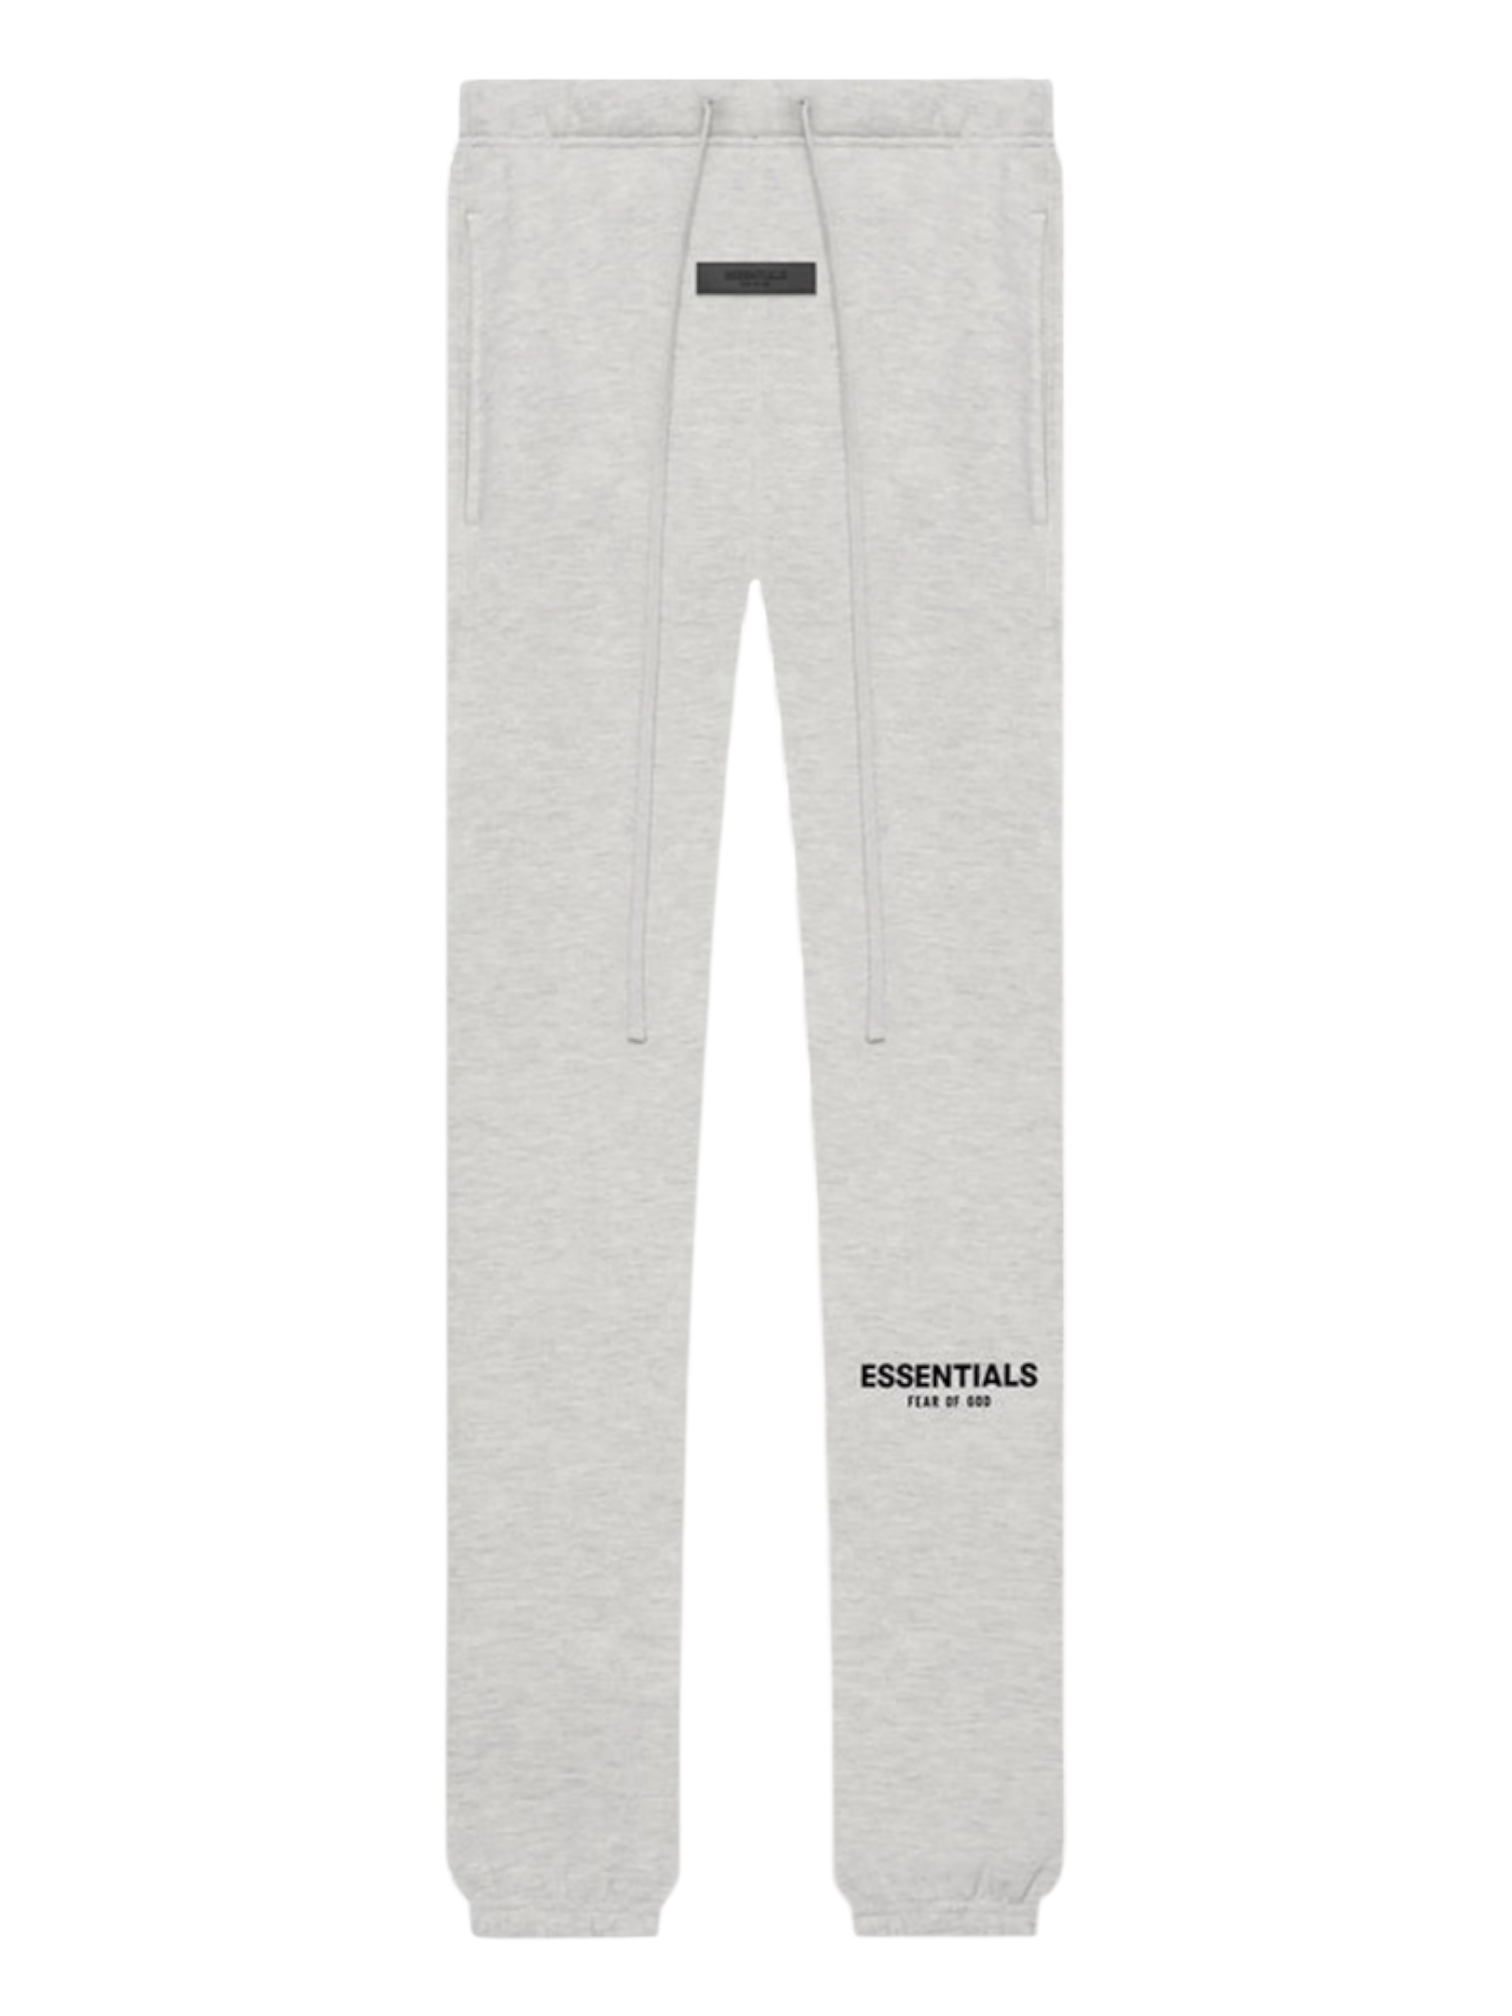 Essentials Fear of God Light Heather Oatmeal Fleece Sweatpants SS22 — Genuine Design Luxury Consignment Calgary, Alberta, Canada New & Pre-Owned Clothing, Shoes, Accessories.